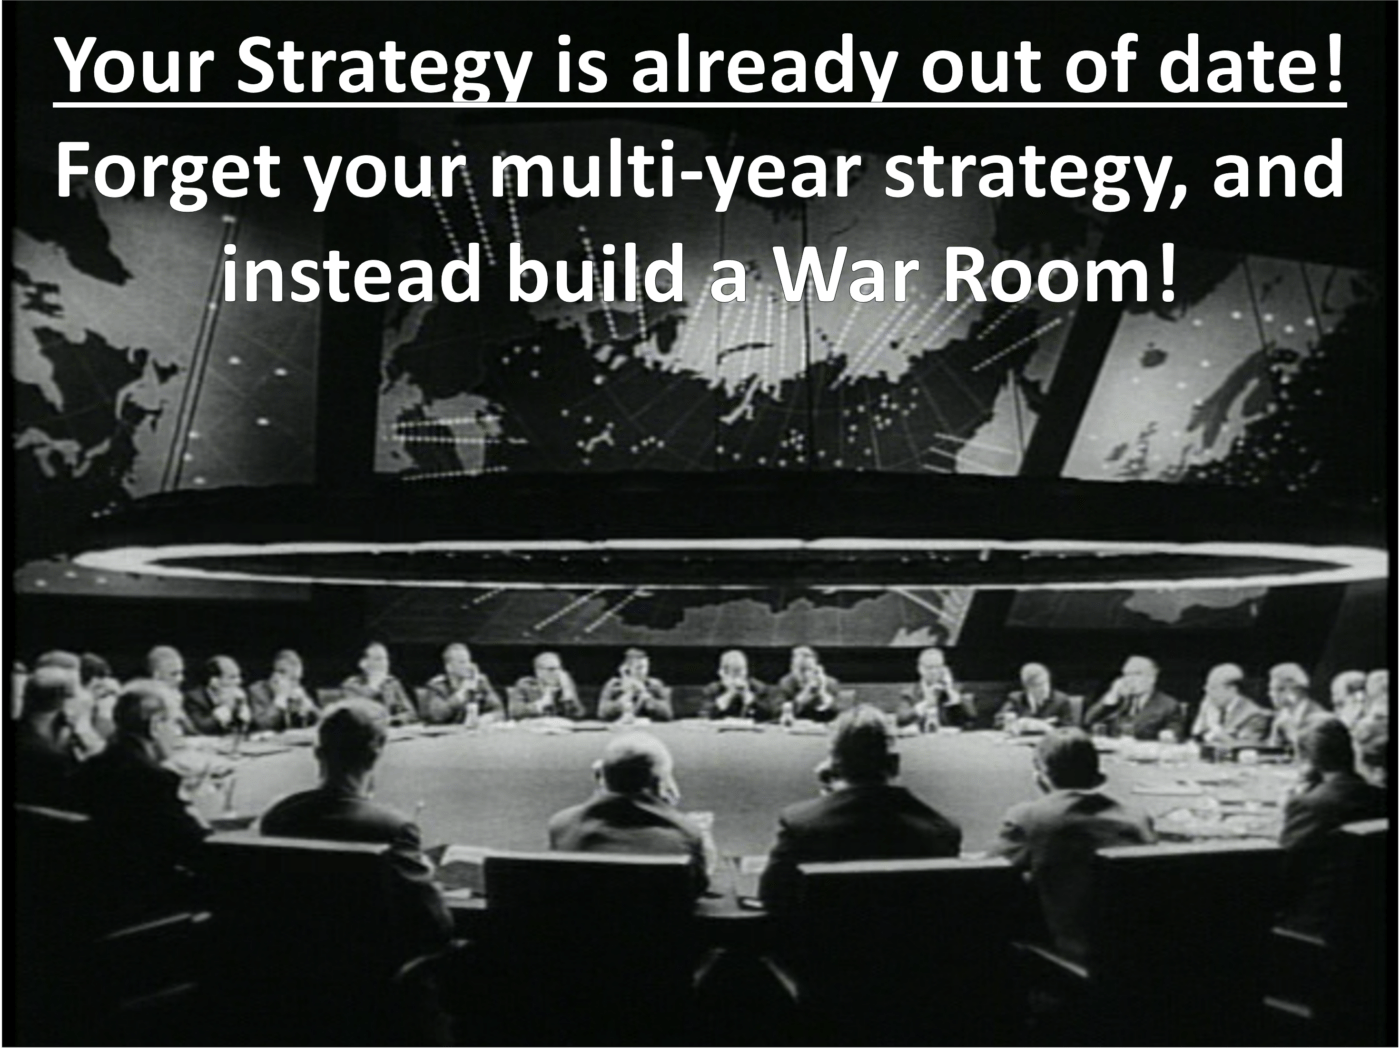 Your Strategy is Already Out of Date - Lie #2 - image Strategy-War-Room-1400x1049 on http://cavemaninasuit.com